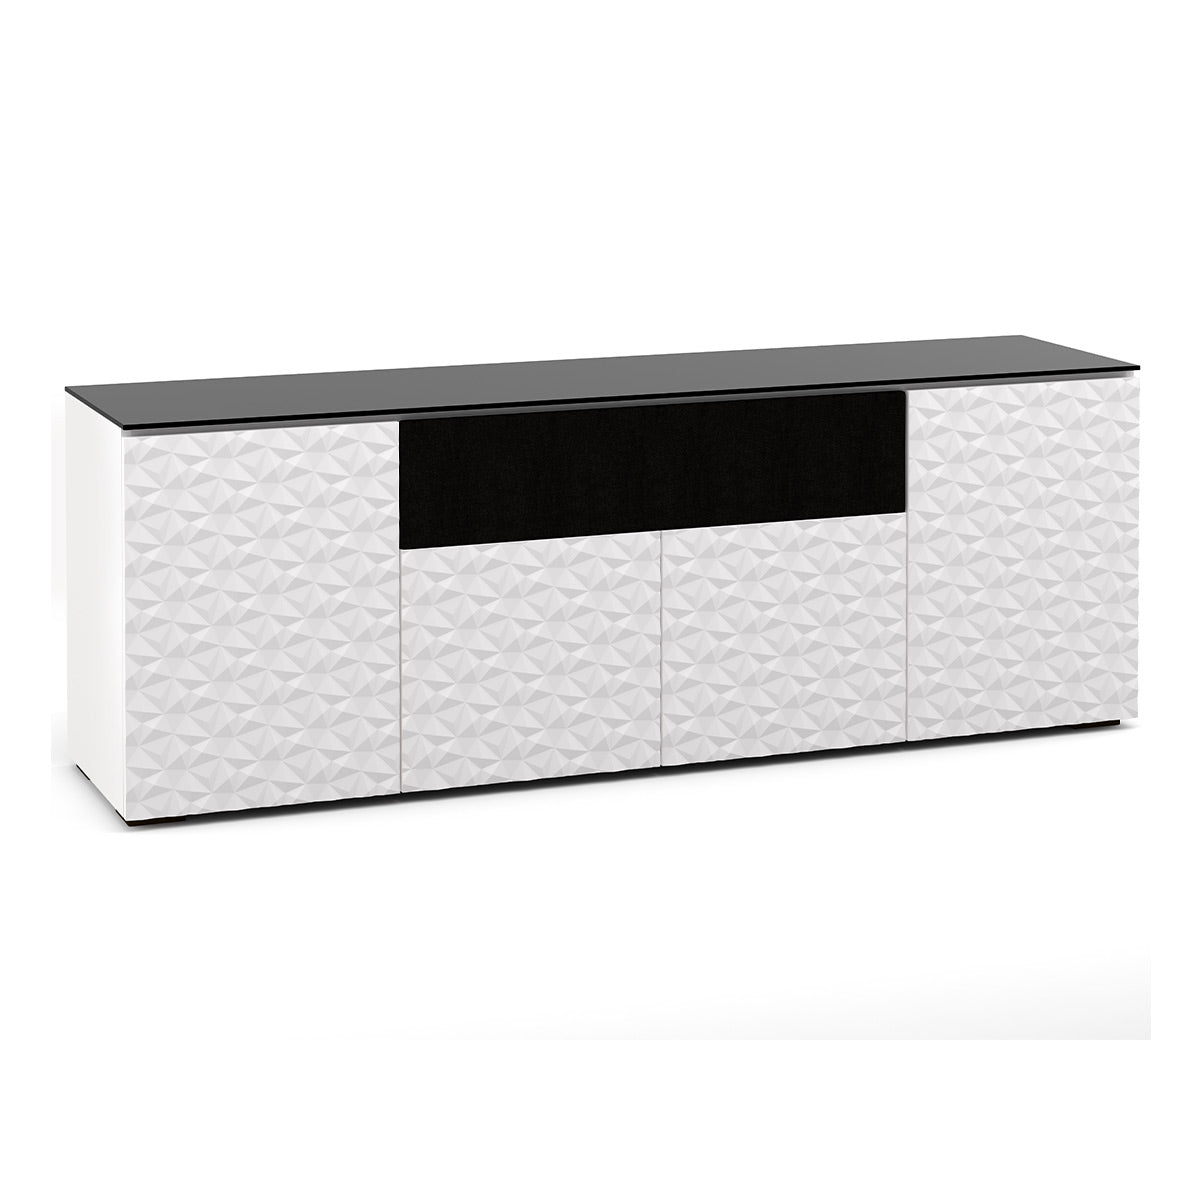 Salamander Chameleon Collection Milan 345 Quad Speaker Integrated Cabinet (Geometric White with Black Glass Top)